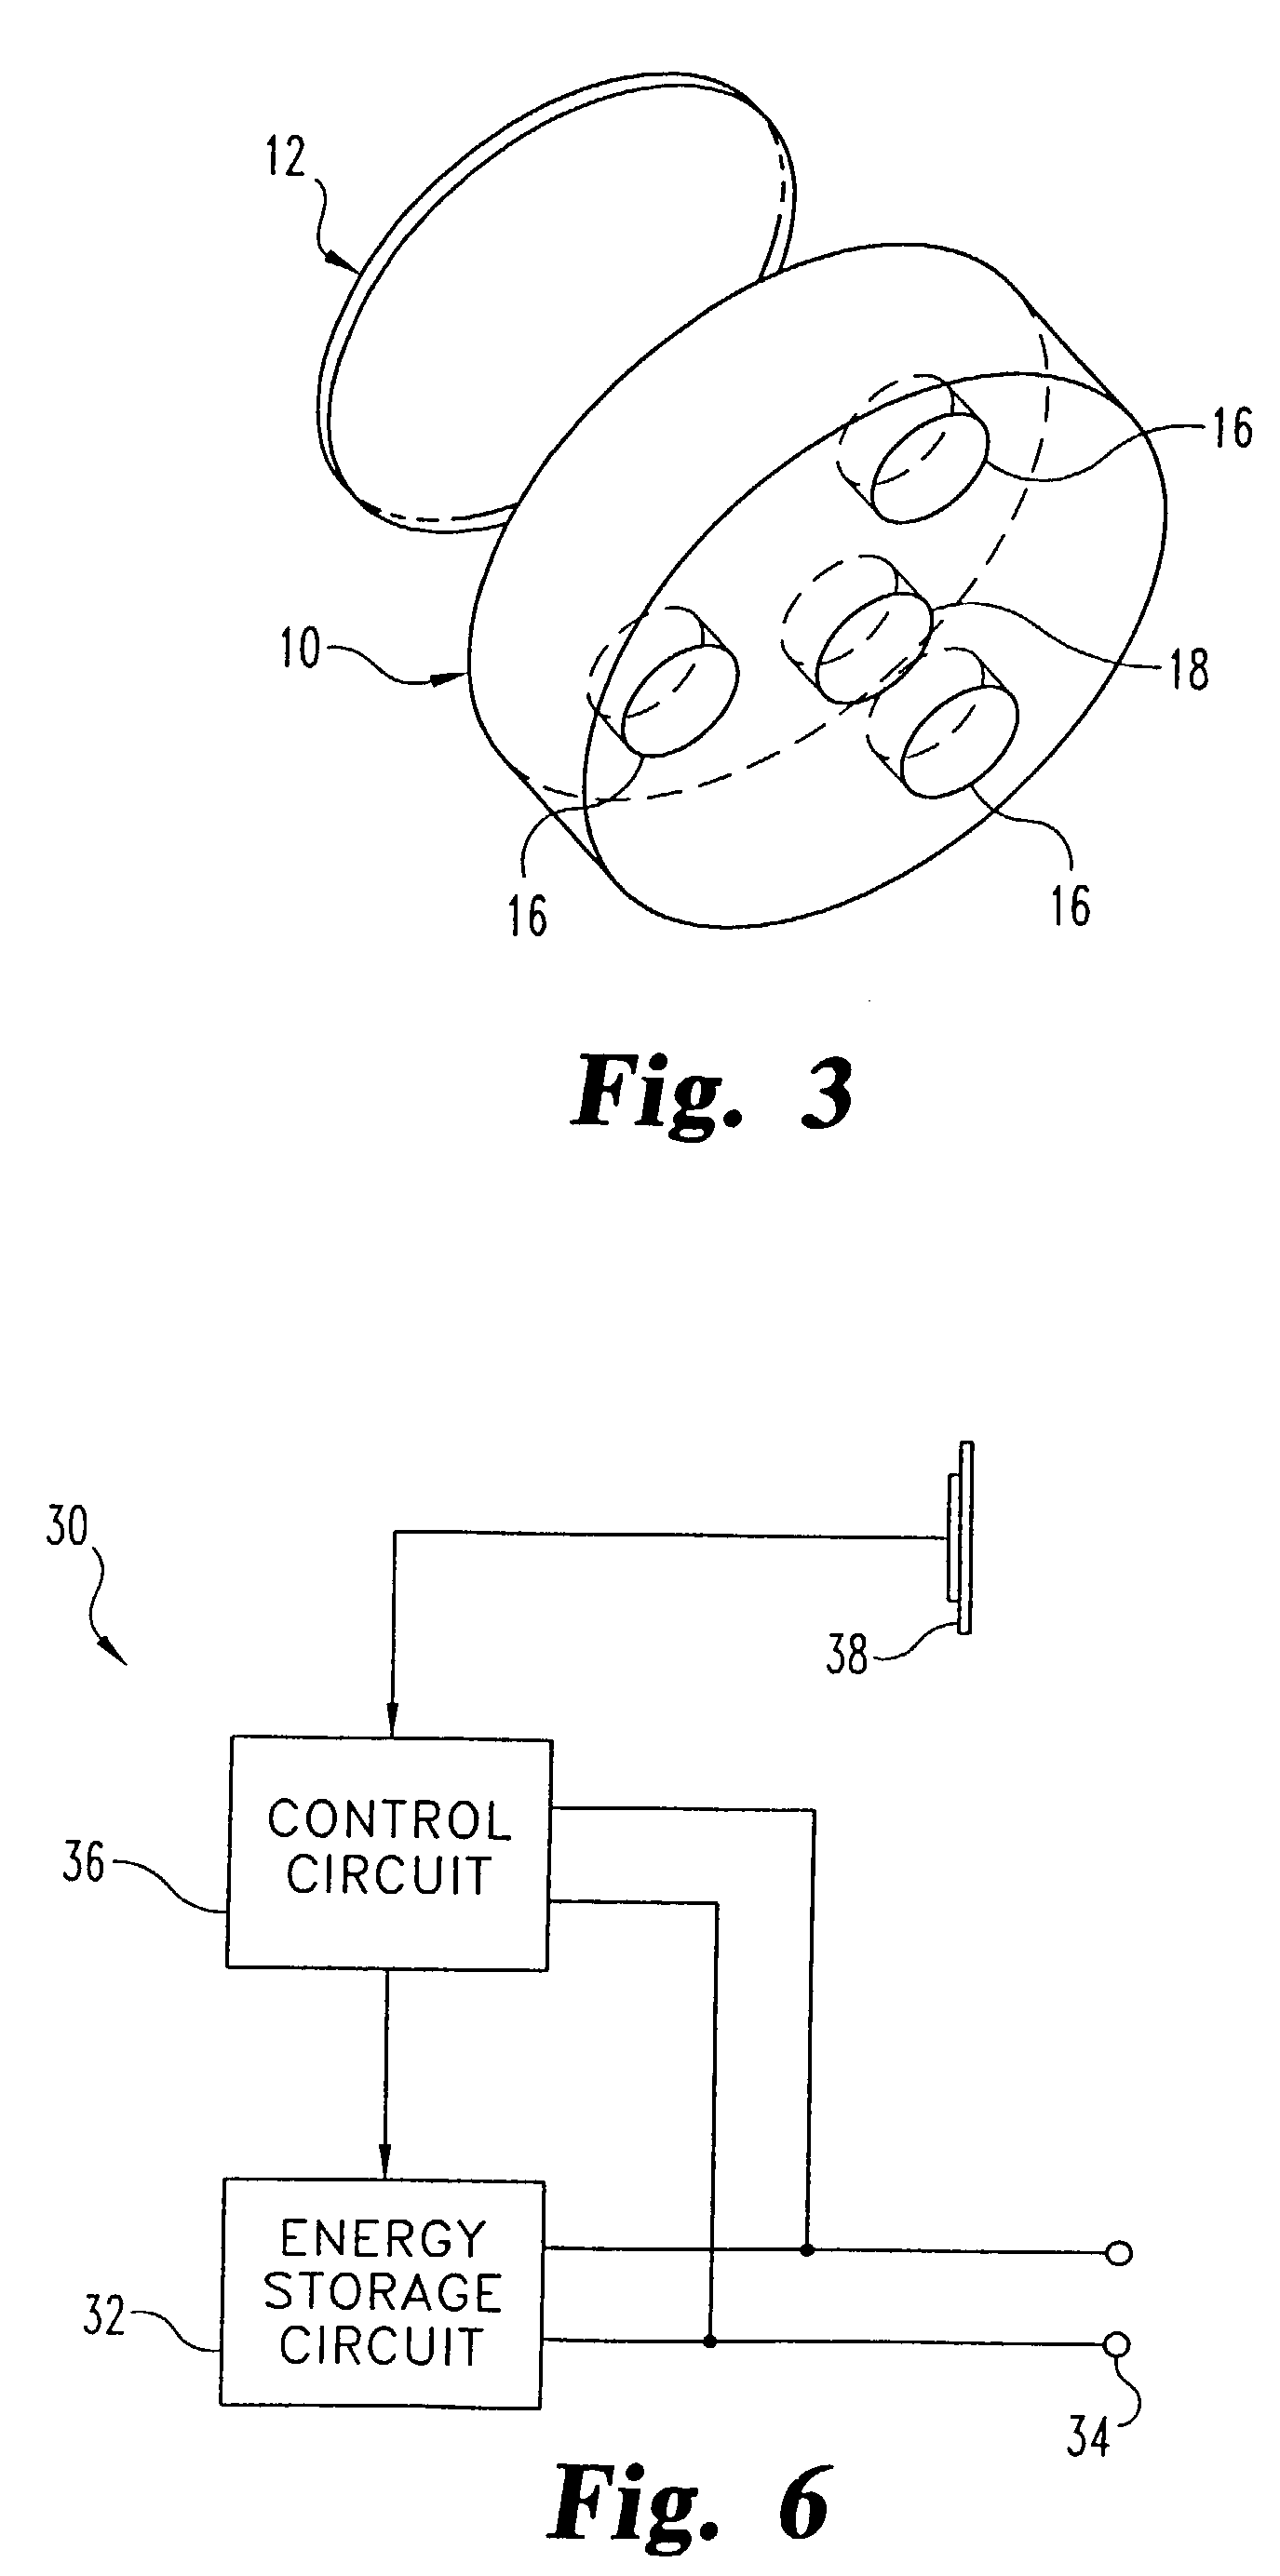 Apparatus and method for noninvasively detecting the quality of cardiac pumping